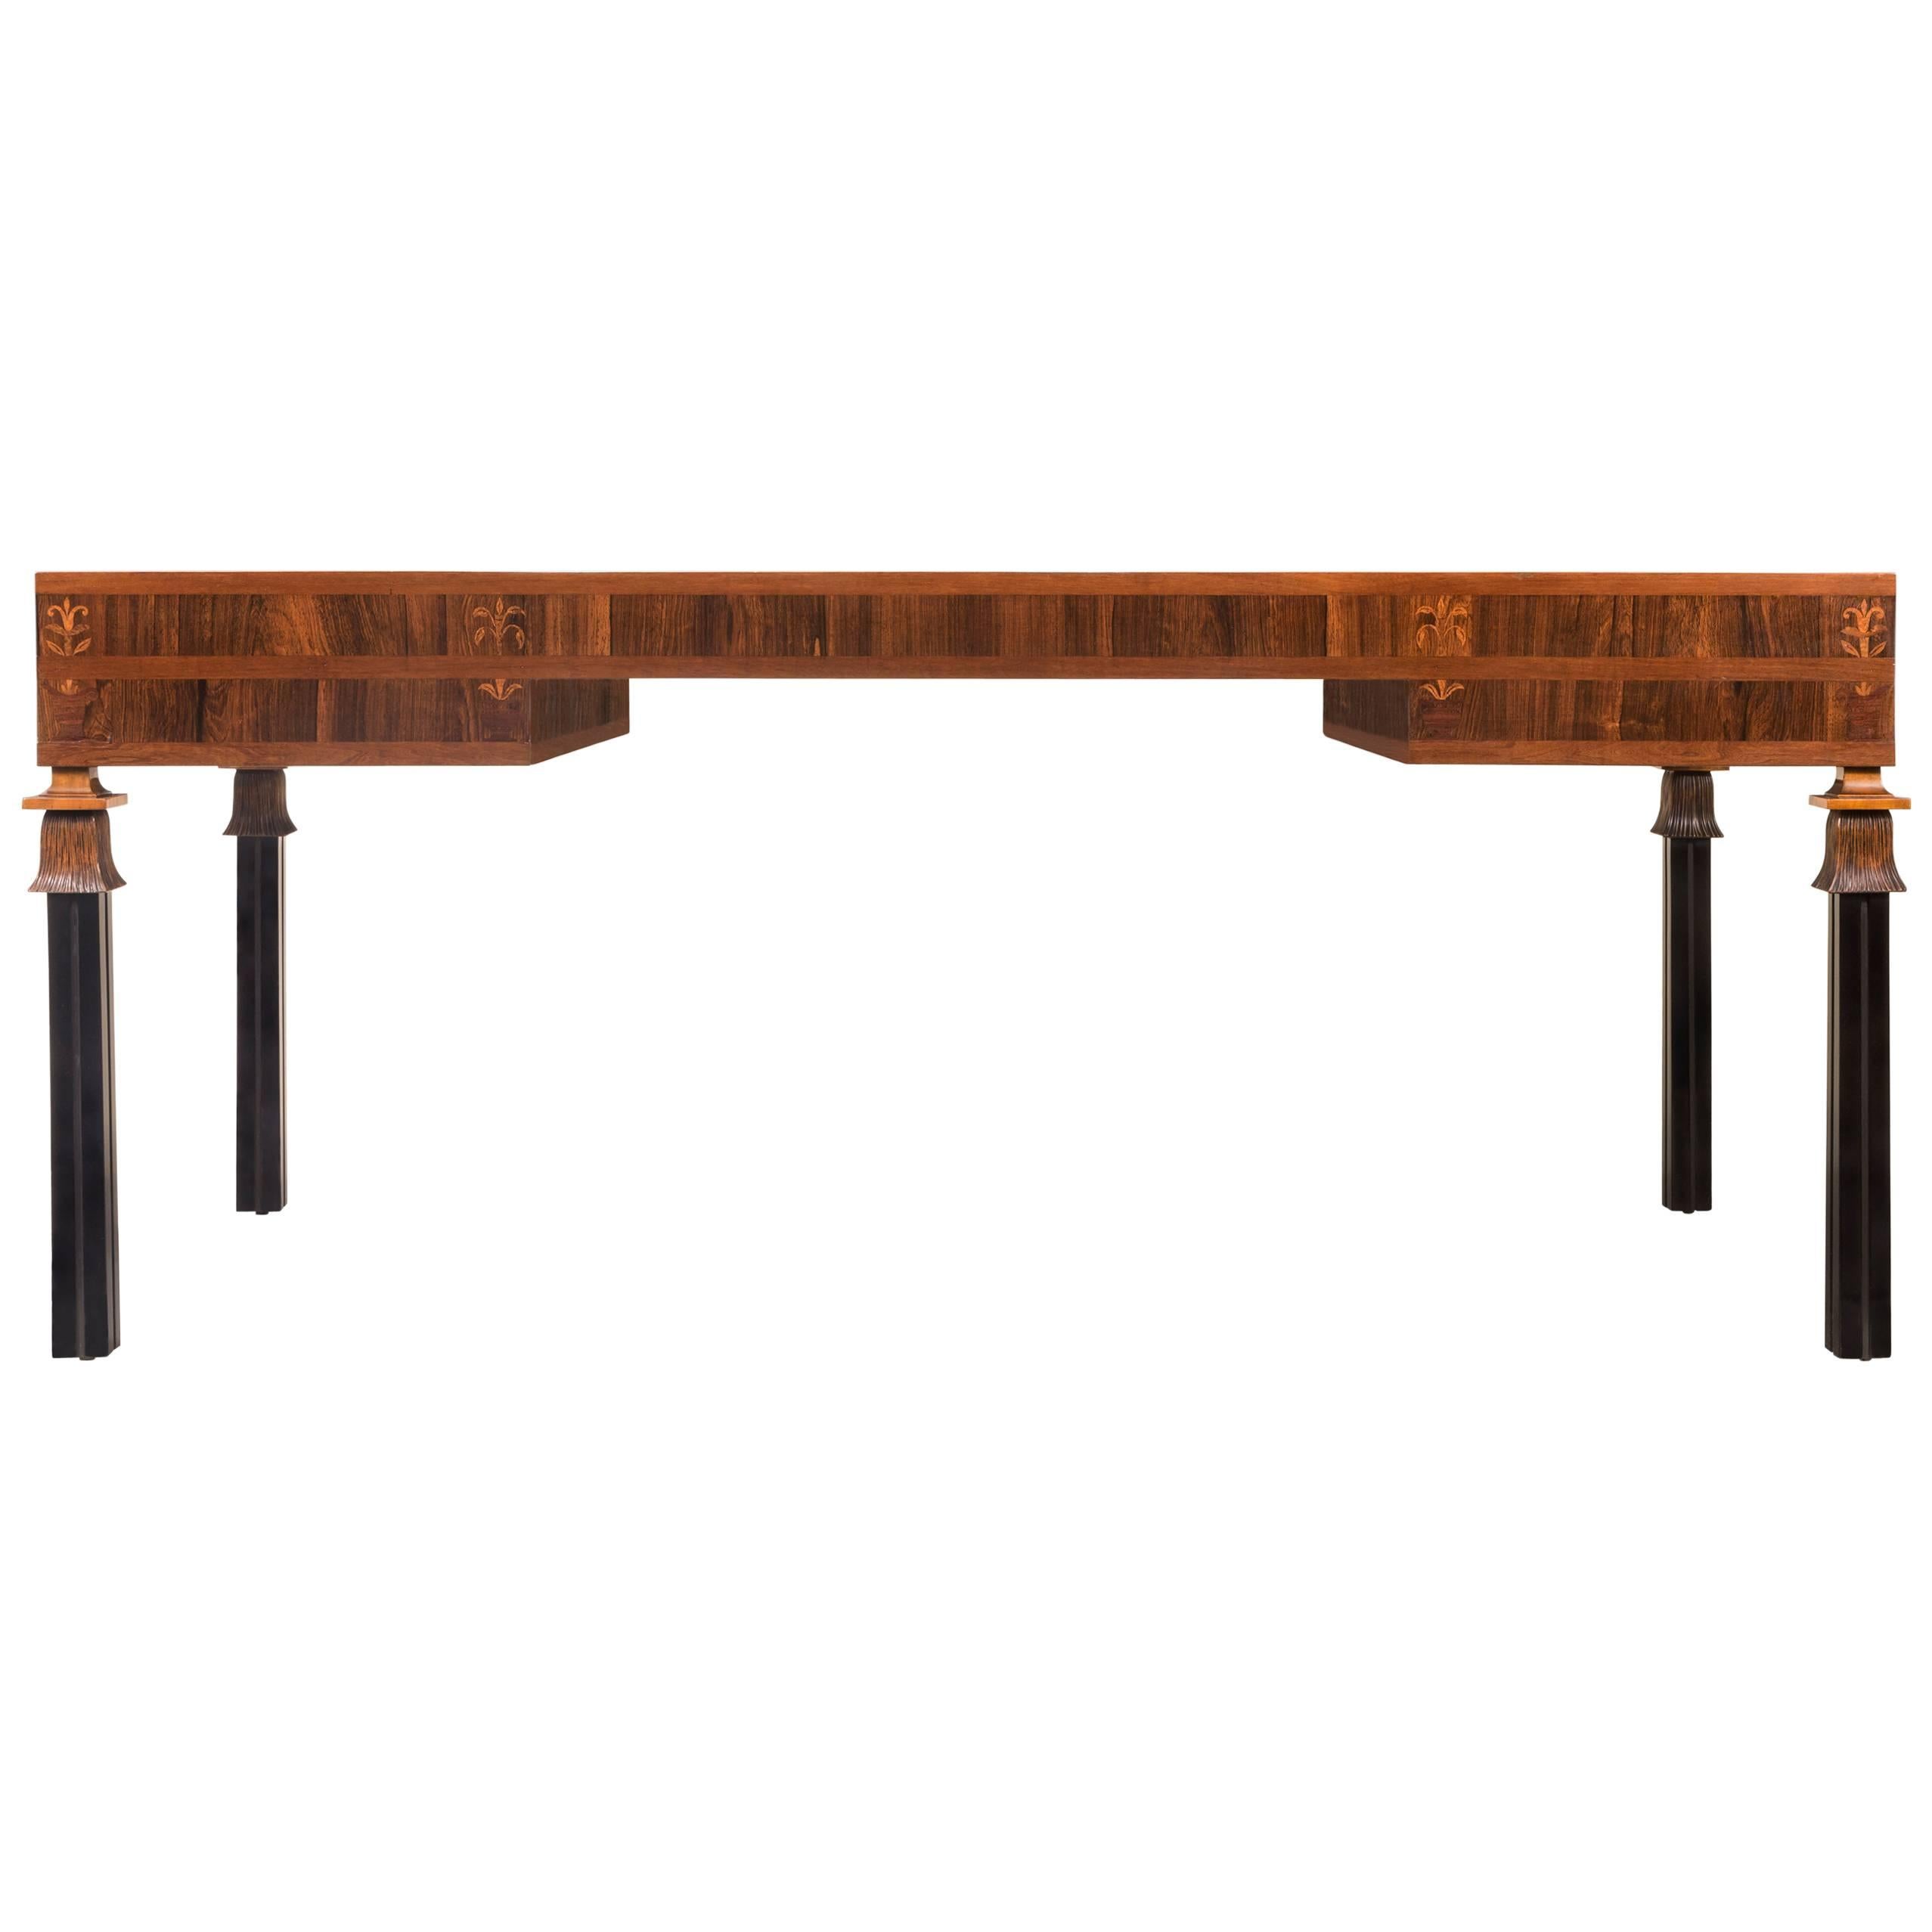 An important and undoubtedly a unique commission presented at the prestigious 1925 Stockholmshantverkarnas Utställning by Sweden's premier furniture designer Carl Malmsten and executed by renowned master craftsman Hjalmar Jackson. The desk is a